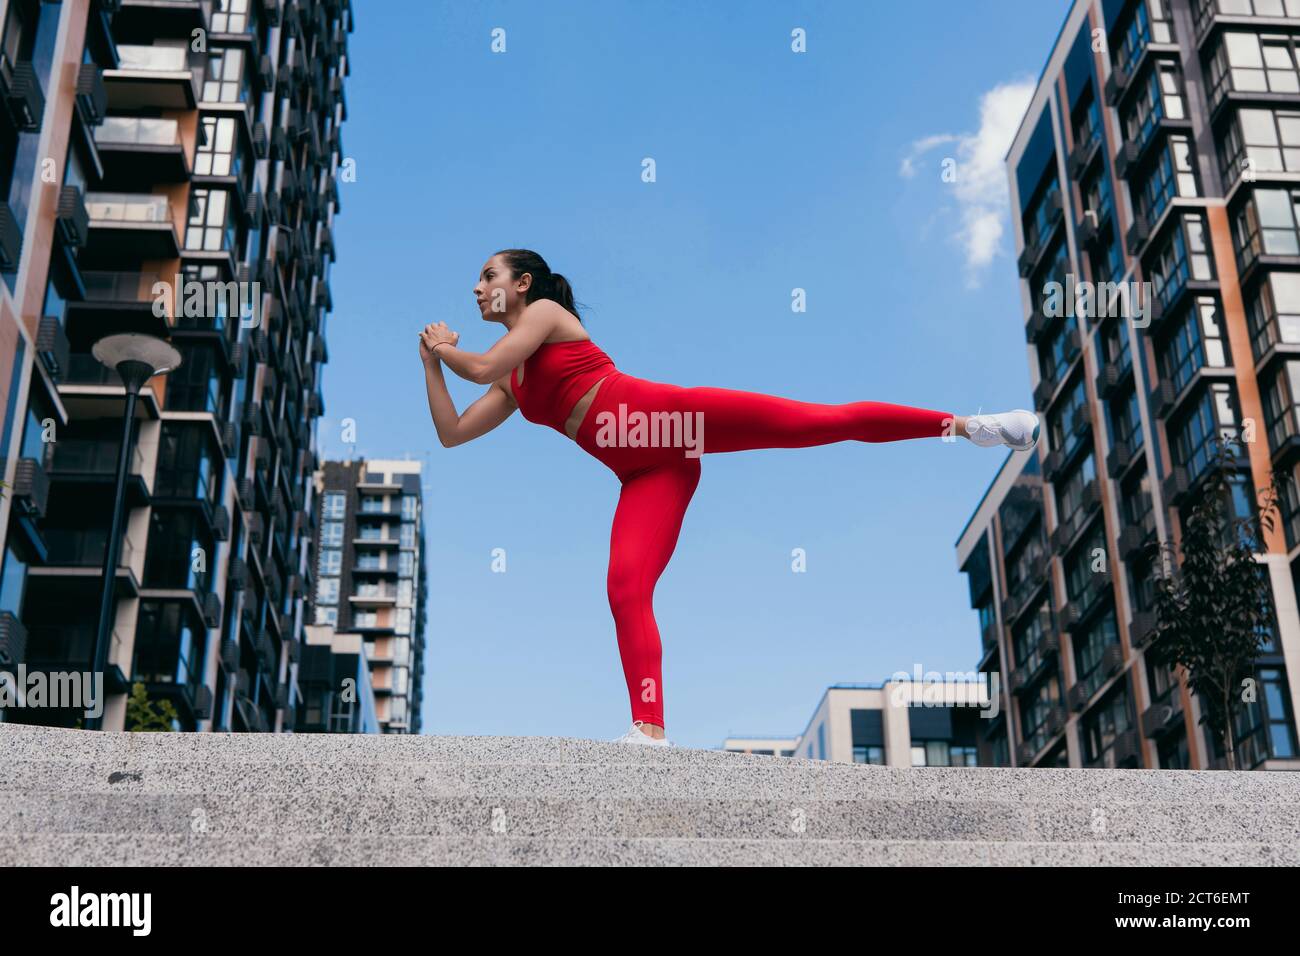 Yoga in Pair. Women. Duo. Balance on One Leg Stock Photo - Image of  concentration, background: 64953108